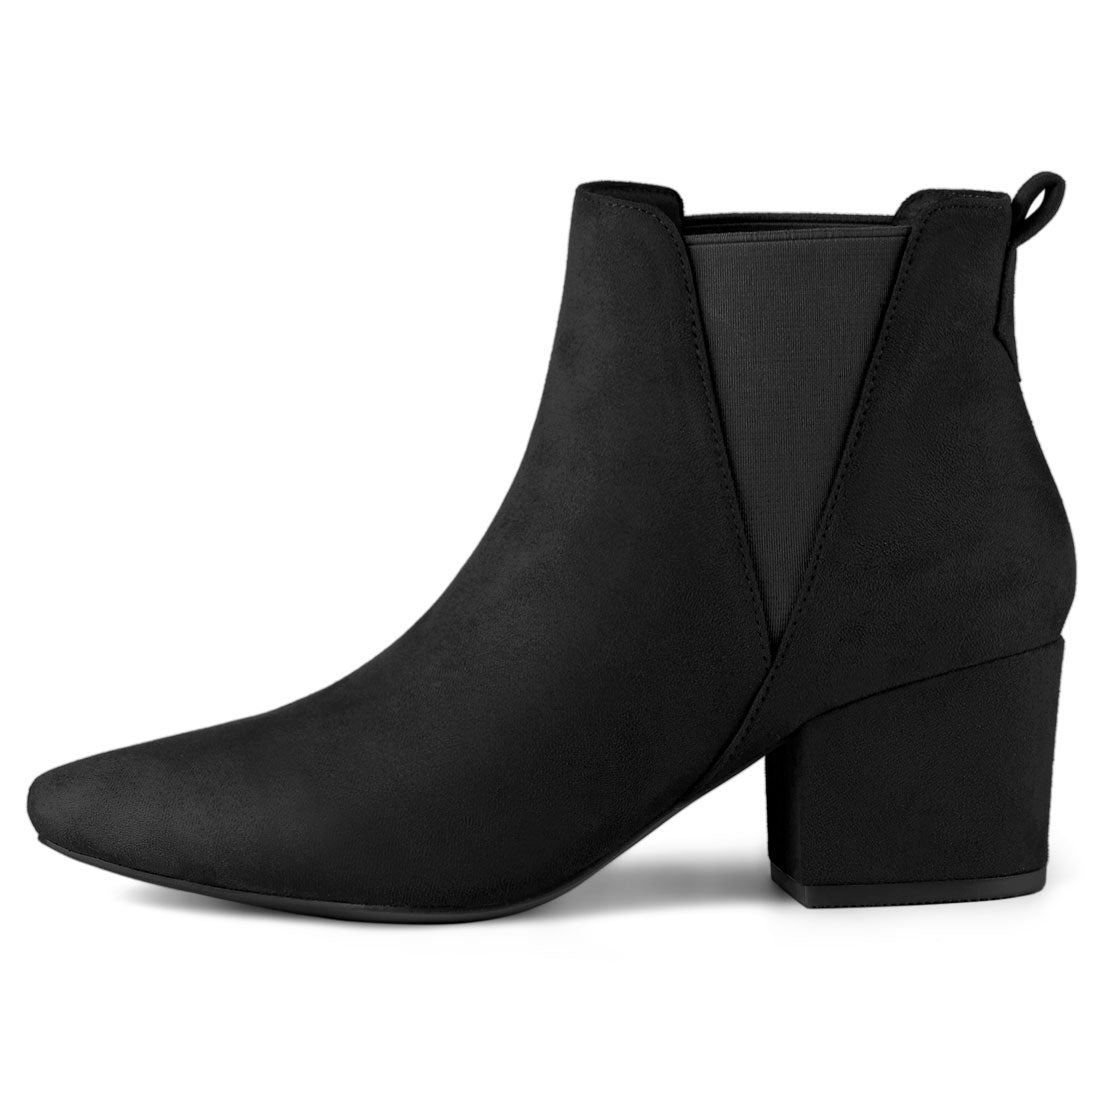 Allegra K Faux Suede Pointed Toe Block Heel Ankle Chelsea Boots